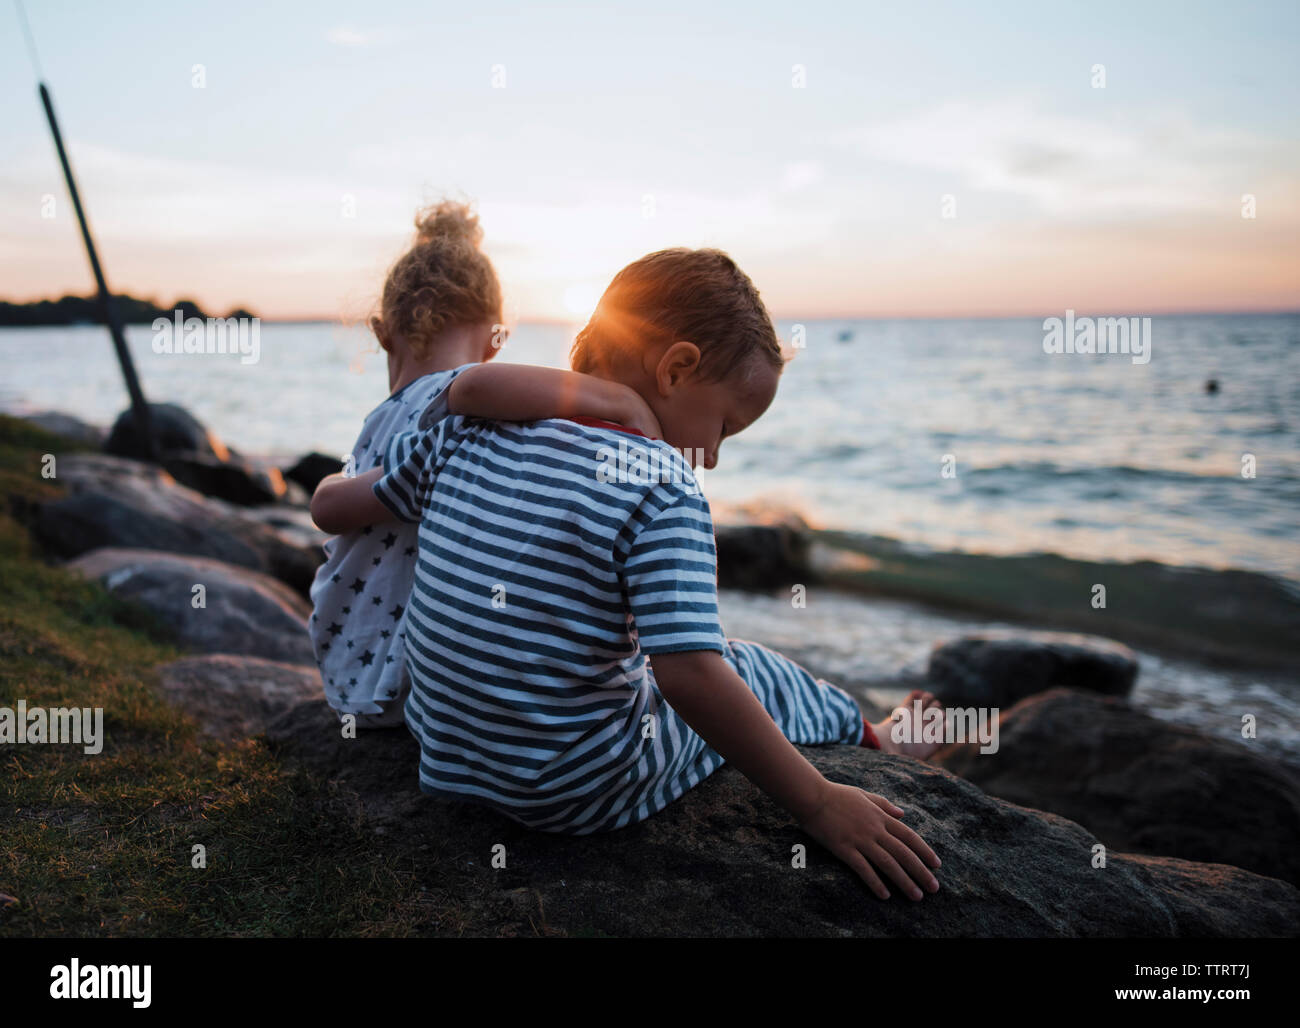 Siblings sitting on rocks by Lake Simcoe against sky during sunset Stock Photo